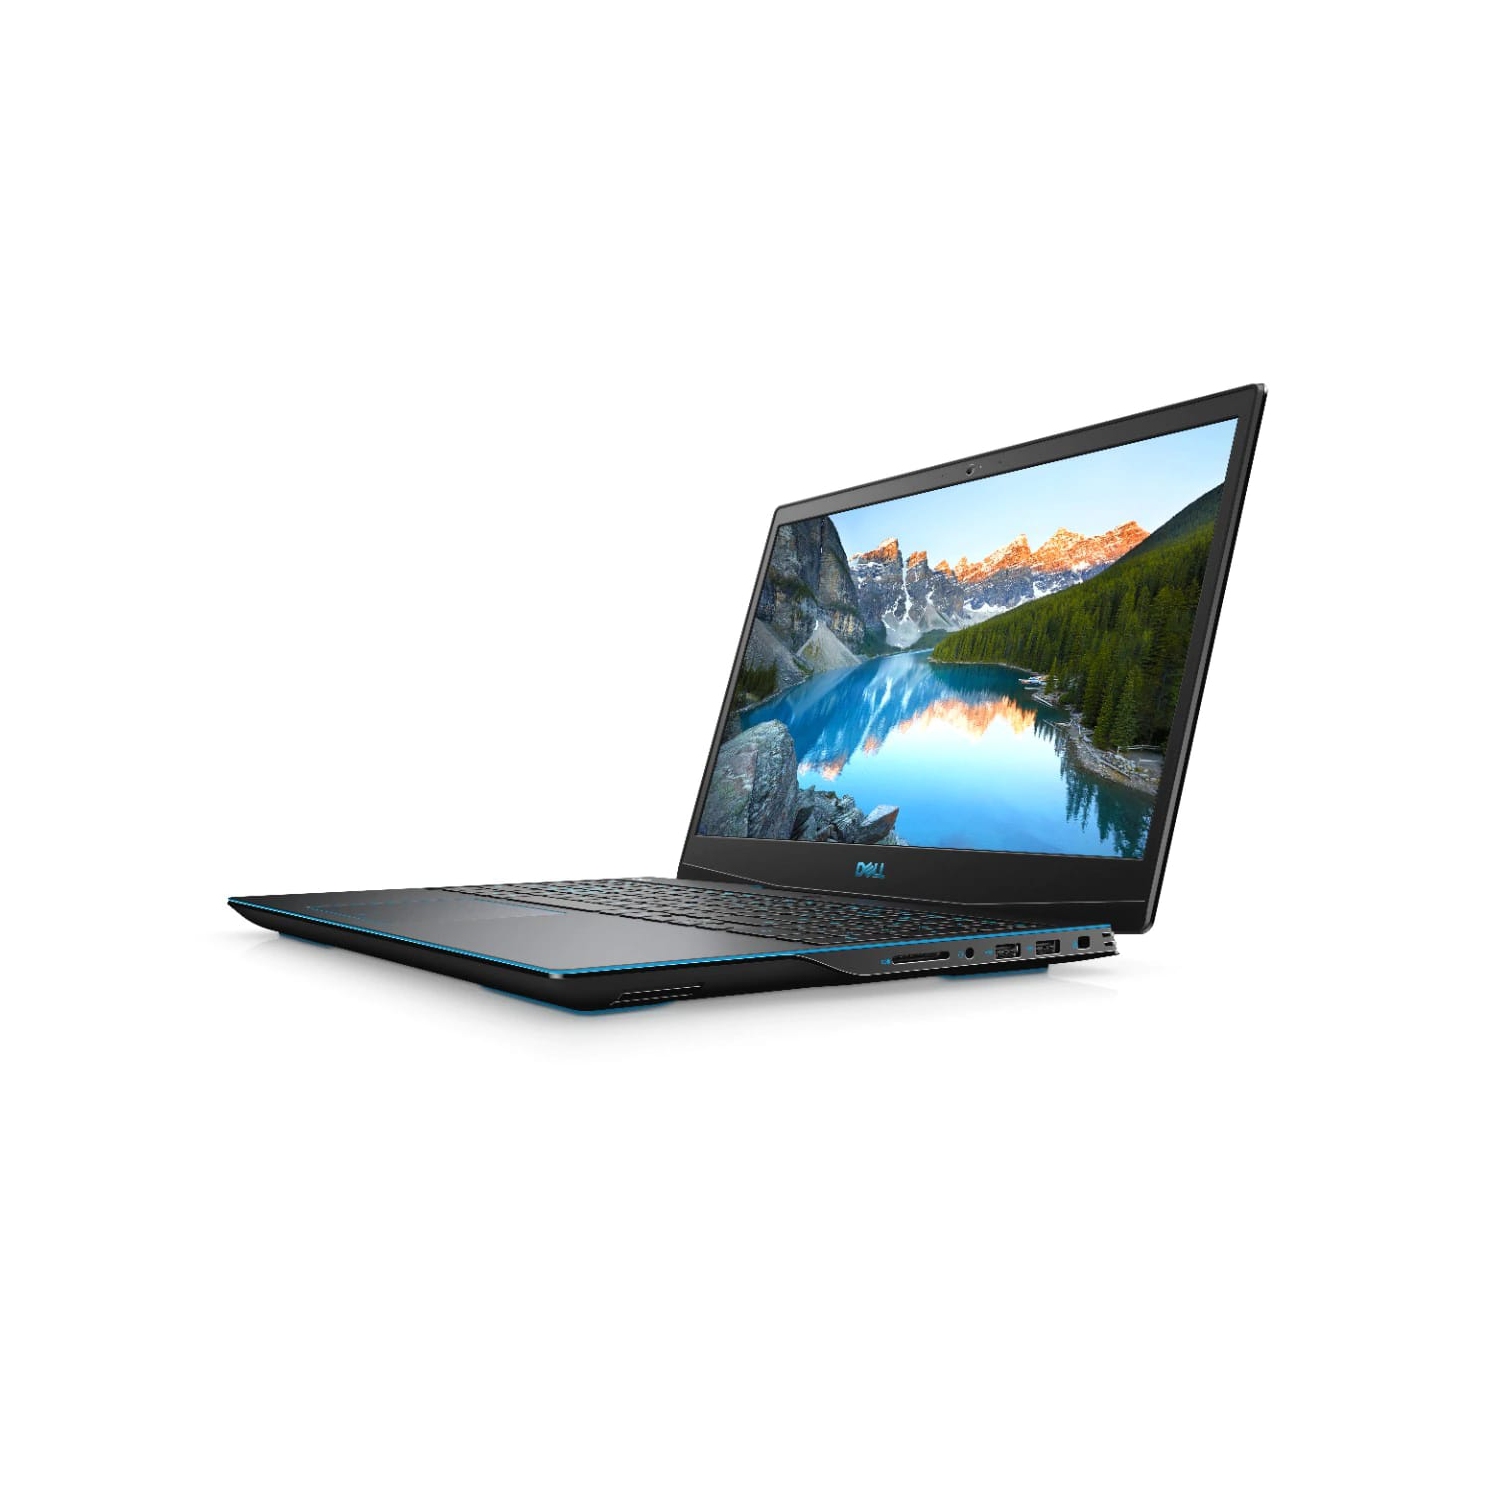 Refurbished (Excellent) – Dell G3 3500 Gaming Laptop (2020) | 15.6" FHD | Core i5 - 512GB SSD - 16GB RAM - 1660 Ti | 4 Cores @ 4.5 GHz - 10th Gen CPU - 6GB GDDR6